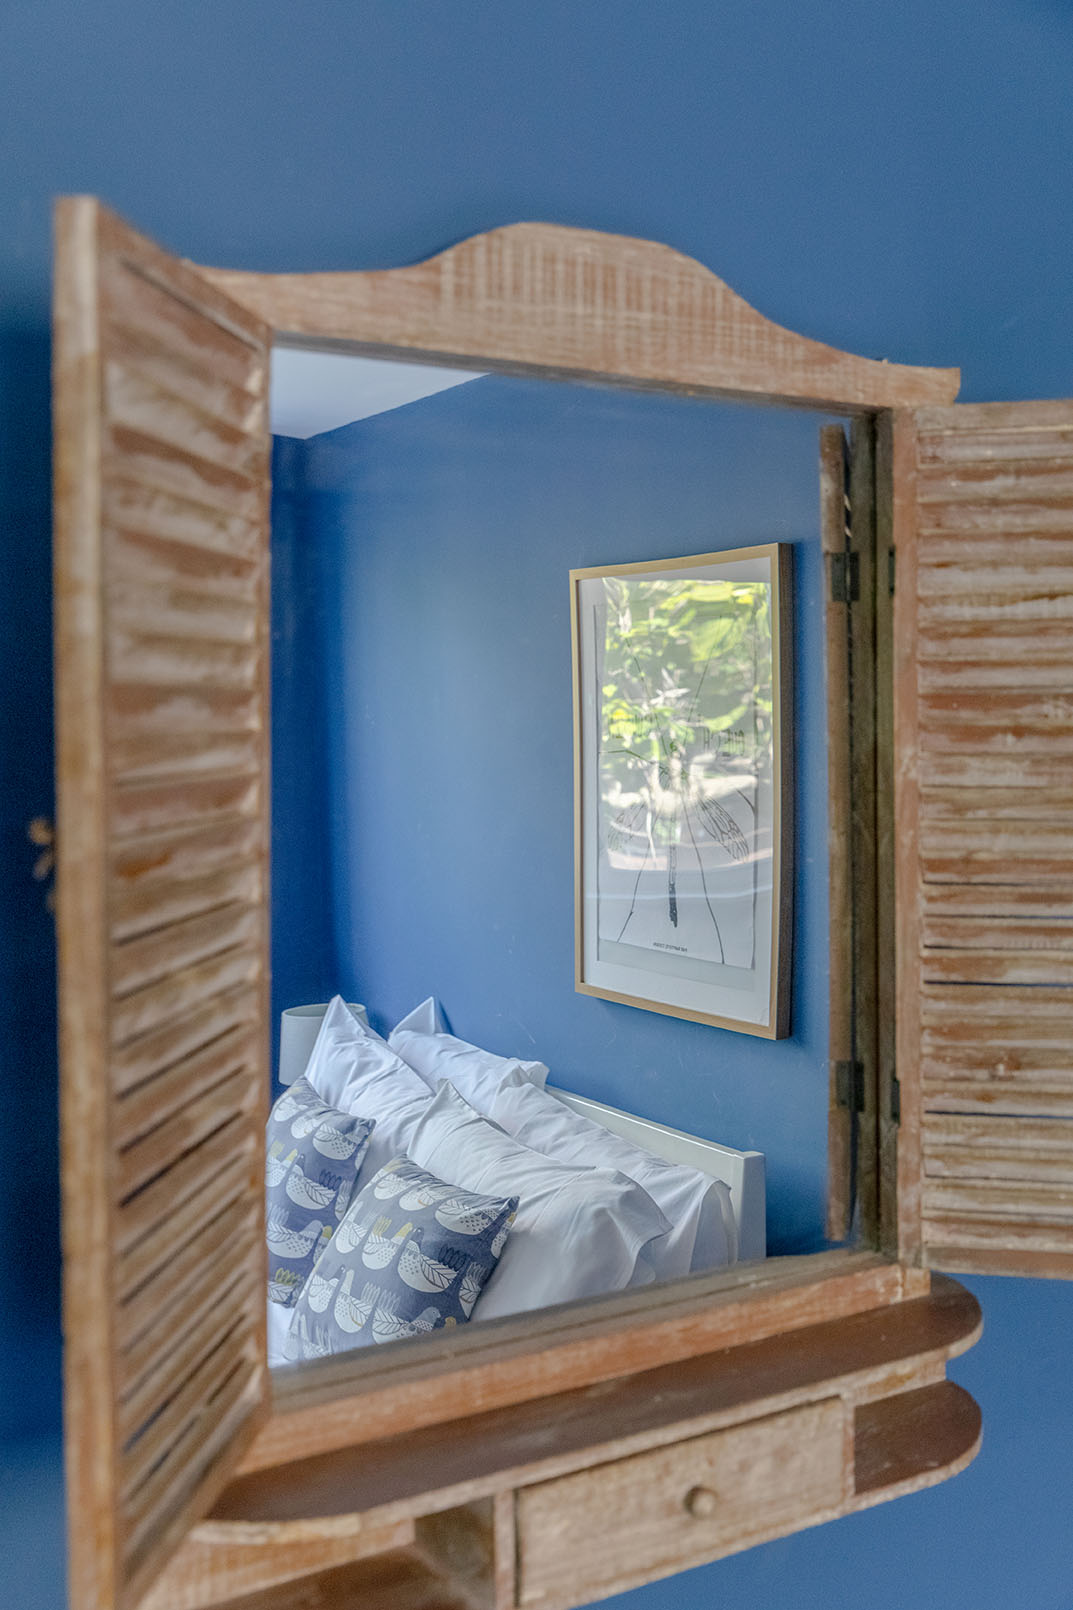 A nice blue painted wall and a small mirror on it, the reflection of a bed, detail property photography for a holiday property listing.